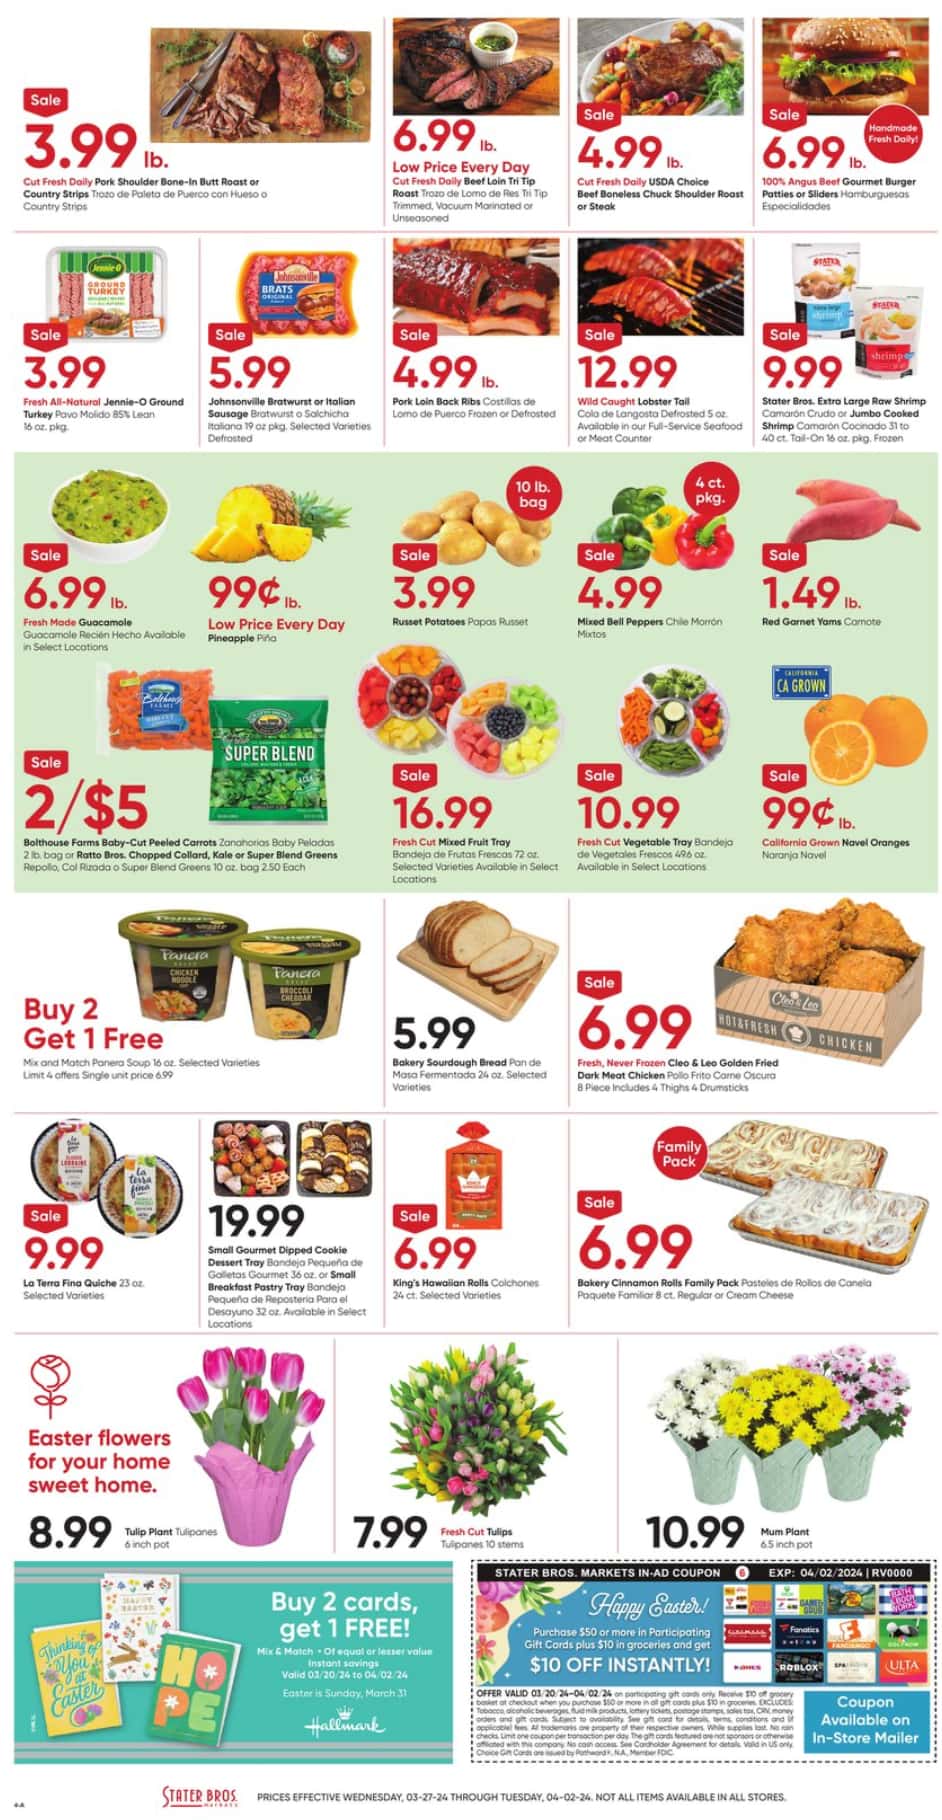 StaterBros_weekly_ad_032724_04